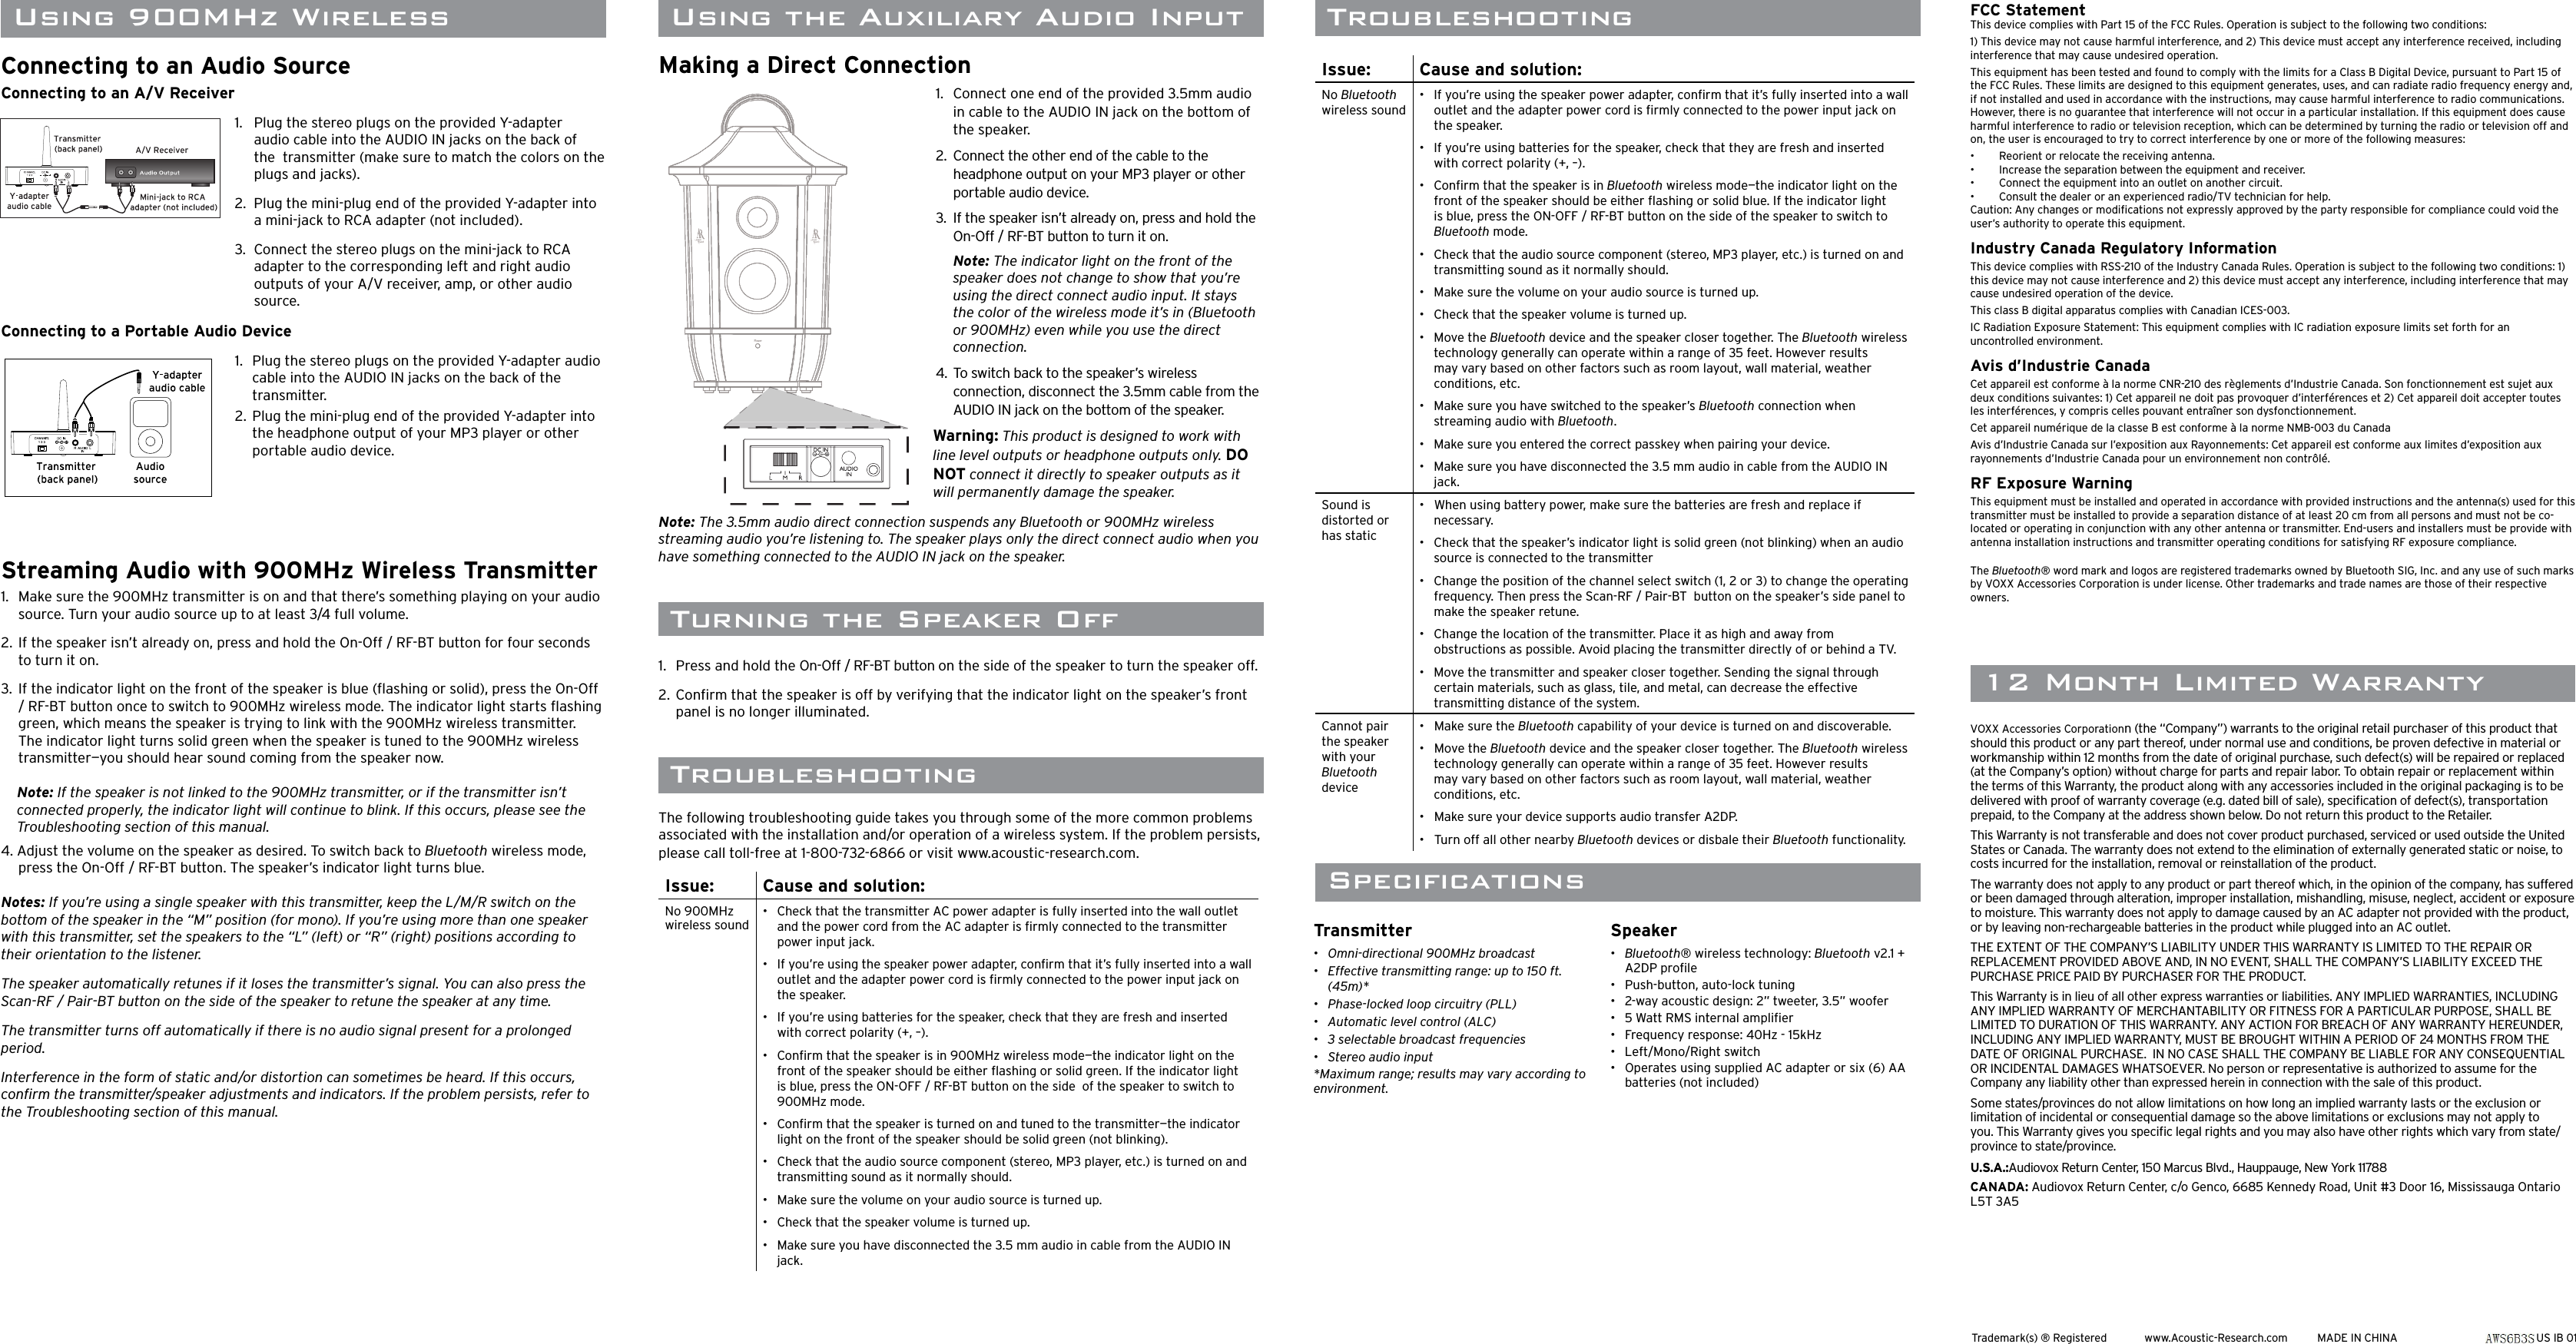 TroubleshootingTroubleshootingThe following troubleshooting guide takes you through some of the more common problems associated with the installation and/or operation of a wireless system. If the problem persists, please call toll-free at 1-800-732-6866 or visit www.acoustic-research.com.Issue: Cause and solution:No 900MHz wireless sound•   Check that the transmitter AC power adapter is fully inserted into the wall outlet and the power cord from the AC adapter is ﬁ rmly connected to the transmitter power input jack.•   If you’re using the speaker power adapter, conﬁ rm that it’s fully inserted into a wall outlet and the adapter power cord is ﬁ rmly connected to the power input jack on the speaker.•   If you’re using batteries for the speaker, check that they are fresh and inserted with correct polarity (+, –).•   Conﬁ rm that the speaker is in 900MHz wireless mode—the indicator light on the front of the speaker should be either ﬂ ashing or solid green. If the indicator light is blue, press the ON-OFF / RF-BT button on the side  of the speaker to switch to 900MHz mode.•   Conﬁ rm that the speaker is turned on and tuned to the transmitter—the indicator light on the front of the speaker should be solid green (not blinking).•   Check that the audio source component (stereo, MP3 player, etc.) is turned on and transmitting sound as it normally should.•   Make sure the volume on your audio source is turned up.•   Check that the speaker volume is turned up.•   Make sure you have disconnected the 3.5 mm audio in cable from the AUDIO IN jack. Trademark(s) ® Registered  www.Acoustic-Research.com  MADE IN CHINA AWS6B3 US IB 0112 Month Limited WarrantySpeciﬁ cationsTransmitter•   Omni-directional 900MHz broadcast•   Effective transmitting range: up to 150 ft. (45m)*•   Phase-locked loop circuitry (PLL)•   Automatic level control (ALC)•   3 selectable broadcast frequencies•   Stereo audio input*Maximum range; results may vary according to environment.Speaker•  Bluetooth® wireless technology: Bluetooth v2.1 + A2DP proﬁ le•  Push-button, auto-lock tuning•   2-way acoustic design: 2” tweeter, 3.5” woofer•   5 Watt RMS internal ampliﬁ er•   Frequency response: 40Hz - 15kHz•   Left/Mono/Right switch•   Operates using supplied AC adapter or six (6) AA batteries (not included)VOXX Accessories Corporationn (the “Company”) warrants to the original retail purchaser of this product that should this product or any part thereof, under normal use and conditions, be proven defective in material or workmanship within 12 months from the date of original purchase, such defect(s) will be repaired or replaced (at the Company’s option) without charge for parts and repair labor. To obtain repair or replacement within the terms of this Warranty, the product along with any accessories included in the original packaging is to be delivered with proof of warranty coverage (e.g. dated bill of sale), speciﬁ cation of defect(s), transportation prepaid, to the Company at the address shown below. Do not return this product to the Retailer.This Warranty is not transferable and does not cover product purchased, serviced or used outside the United States or Canada. The warranty does not extend to the elimination of externally generated static or noise, to costs incurred for the installation, removal or reinstallation of the product. The warranty does not apply to any product or part thereof which, in the opinion of the company, has suffered or been damaged through alteration, improper installation, mishandling, misuse, neglect, accident or exposure to moisture. This warranty does not apply to damage caused by an AC adapter not provided with the product, or by leaving non-rechargeable batteries in the product while plugged into an AC outlet.  THE EXTENT OF THE COMPANY’S LIABILITY UNDER THIS WARRANTY IS LIMITED TO THE REPAIR OR REPLACEMENT PROVIDED ABOVE AND, IN NO EVENT, SHALL THE COMPANY’S LIABILITY EXCEED THE PURCHASE PRICE PAID BY PURCHASER FOR THE PRODUCT.This Warranty is in lieu of all other express warranties or liabilities. ANY IMPLIED WARRANTIES, INCLUDING ANY IMPLIED WARRANTY OF MERCHANTABILITY OR FITNESS FOR A PARTICULAR PURPOSE, SHALL BE LIMITED TO DURATION OF THIS WARRANTY. ANY ACTION FOR BREACH OF ANY WARRANTY HEREUNDER, INCLUDING ANY IMPLIED WARRANTY, MUST BE BROUGHT WITHIN A PERIOD OF 24 MONTHS FROM THE DATE OF ORIGINAL PURCHASE.  IN NO CASE SHALL THE COMPANY BE LIABLE FOR ANY CONSEQUENTIAL OR INCIDENTAL DAMAGES WHATSOEVER. No person or representative is authorized to assume for the Company any liability other than expressed herein in connection with the sale of this product.Some states/provinces do not allow limitations on how long an implied warranty lasts or the exclusion or limitation of incidental or consequential damage so the above limitations or exclusions may not apply to you. This Warranty gives you speciﬁ c legal rights and you may also have other rights which vary from state/province to state/province.U.S.A.:Audiovox Return Center, 150 Marcus Blvd., Hauppauge, New York 11788CANADA: Audiovox Return Center, c/o Genco, 6685 Kennedy Road, Unit #3 Door 16, Mississauga Ontario L5T 3A5 Turning the Speaker Off1.  Press and hold the On-Off / RF-BT button on the side of the speaker to turn the speaker off. 2. Conﬁ rm that the speaker is off by verifying that the indicator light on the speaker’s front panel is no longer illuminated.FCC StatementThis device complies with Part 15 of the FCC Rules. Operation is subject to the following two conditions: 1) This device may not cause harmful interference, and 2) This device must accept any interference received, including interference that may cause undesired operation. This equipment has been tested and found to comply with the limits for a Class B Digital Device, pursuant to Part 15 of the FCC Rules. These limits are designed to this equipment generates, uses, and can radiate radio frequency energy and, if not installed and used in accordance with the instructions, may cause harmful interference to radio communications. However, there is no guarantee that interference will not occur in a particular installation. If this equipment does cause harmful interference to radio or television reception, which can be determined by turning the radio or television off and on, the user is encouraged to try to correct interference by one or more of the following measures: •   Reorient or relocate the receiving antenna. •   Increase the separation between the equipment and receiver. •   Connect the equipment into an outlet on another circuit. •   Consult the dealer or an experienced radio/TV technician for help. Caution: Any changes or modiﬁ cations not expressly approved by the party responsible for compliance could void the user’s authority to operate this equipment. Industry Canada Regulatory InformationThis device complies with RSS-210 of the Industry Canada Rules. Operation is subject to the following two conditions: 1) this device may not cause interference and 2) this device must accept any interference, including interference that may cause undesired operation of the device. This class B digital apparatus complies with Canadian ICES-003.IC Radiation Exposure Statement: This equipment complies with IC radiation exposure limits set forth for an uncontrolled environment.Avis d’Industrie CanadaCet appareil est conforme à la norme CNR-210 des règlements d’Industrie Canada. Son fonctionnement est sujet aux deux conditions suivantes: 1) Cet appareil ne doit pas provoquer d’interférences et 2) Cet appareil doit accepter toutes les interférences, y compris celles pouvant entraîner son dysfonctionnement. Cet appareil numérique de la classe B est conforme à la norme NMB-003 du Canada Avis d’Industrie Canada sur l’exposition aux Rayonnements: Cet appareil est conforme aux limites d’exposition aux rayonnements d’Industrie Canada pour un environnement non contrôlé.RF Exposure WarningThis equipment must be installed and operated in accordance with provided instructions and the antenna(s) used for this transmitter must be installed to provide a separation distance of at least 20 cm from all persons and must not be co-located or operating in conjunction with any other antenna or transmitter. End-users and installers must be provide with antenna installation instructions and transmitter operating conditions for satisfying RF exposure compliance.The Bluetooth® word mark and logos are registered trademarks owned by Bluetooth SIG, Inc. and any use of such marks by VOXX Accessories Corporation is under license. Other trademarks and trade names are those of their respective owners.Making a Direct Connection1.  Connect one end of the provided 3.5mm audio in cable to the AUDIO IN jack on the bottom of the speaker.2.  Connect the other end of the cable to the headphone output on your MP3 player or other portable audio device.3.  If the speaker isn’t already on, press and hold the On-Off / RF-BT button to turn it on. Note: The indicator light on the front of the speaker does not change to show that you’re using the direct connect audio input. It stays the color of the wireless mode it’s in (Bluetooth or 900MHz) even while you use the direct connection. 4.  To switch back to the speaker’s wireless connection, disconnect the 3.5mm cable from the AUDIO IN jack on the bottom of the speaker.Warning: This product is designed to work with line level outputs or headphone outputs only. DO NOT connect it directly to speaker outputs as it will permanently damage the speaker.Note: The 3.5mm audio direct connection suspends any Bluetooth or 900MHz wireless streaming audio you’re listening to. The speaker plays only the direct connect audio when you have something connected to the AUDIO IN jack on the speaker. Using the Auxiliary Audio InputPow e rPowerLMRDCINConnecting to an Audio SourceConnecting to an A/V Receiver1.   Plug the stereo plugs on the provided Y-adapter audio cable into the AUDIO IN jacks on the back of the  transmitter (make sure to match the colors on the plugs and jacks).2.  Plug the mini-plug end of the provided Y-adapter into a mini-jack to RCA adapter (not included).3.  Connect the stereo plugs on the mini-jack to RCA adapter to the corresponding left and right audio outputs of your A/V receiver, amp, or other audio source.Connecting to a Portable Audio Device1.   Plug the stereo plugs on the provided Y-adapter audio cable into the AUDIO IN jacks on the back of the transmitter.2.  Plug the mini-plug end of the provided Y-adapter into the headphone output of your MP3 player or other portable audio device.Streaming Audio with 900MHz Wireless Transmitter1.   Make sure the 900MHz transmitter is on and that there’s something playing on your audio source. Turn your audio source up to at least 3/4 full volume.2.  If the speaker isn’t already on, press and hold the On-Off / RF-BT button for four seconds to turn it on.3.  If the indicator light on the front of the speaker is blue (ﬂ ashing or solid), press the On-Off / RF-BT button once to switch to 900MHz wireless mode. The indicator light starts ﬂ ashing green, which means the speaker is trying to link with the 900MHz wireless transmitter. The indicator light turns solid green when the speaker is tuned to the 900MHz wireless transmitter—you should hear sound coming from the speaker now.Note: If the speaker is not linked to the 900MHz transmitter, or if the transmitter isn’t connected properly, the indicator light will continue to blink. If this occurs, please see the Troubleshooting section of this manual.4. Adjust the volume on the speaker as desired. To switch back to Bluetooth wireless mode, press the On-Off / RF-BT button. The speaker’s indicator light turns blue.Notes: If you’re using a single speaker with this transmitter, keep the L/M/R switch on the bottom of the speaker in the “M” position (for mono). If you’re using more than one speaker with this transmitter, set the speakers to the “L” (left) or “R” (right) positions according to their orientation to the listener.The speaker automatically retunes if it loses the transmitter’s signal. You can also press the Scan-RF / Pair-BT button on the side of the speaker to retune the speaker at any time.The transmitter turns off automatically if there is no audio signal present for a prolonged period.Interference in the form of static and/or distortion can sometimes be heard. If this occurs, conﬁ rm the transmitter/speaker adjustments and indicators. If the problem persists, refer to the Troubleshooting section of this manual.Issue: Cause and solution:No Bluetooth wireless sound•   If you’re using the speaker power adapter, conﬁ rm that it’s fully inserted into a wall outlet and the adapter power cord is ﬁ rmly connected to the power input jack on the speaker.•   If you’re using batteries for the speaker, check that they are fresh and inserted with correct polarity (+, –).•   Conﬁ rm that the speaker is in Bluetooth wireless mode—the indicator light on the front of the speaker should be either ﬂ ashing or solid blue. If the indicator light is blue, press the ON-OFF / RF-BT button on the side of the speaker to switch to Bluetooth mode.•   Check that the audio source component (stereo, MP3 player, etc.) is turned on and transmitting sound as it normally should.•   Make sure the volume on your audio source is turned up.•   Check that the speaker volume is turned up.•   Move the Bluetooth device and the speaker closer together. The Bluetooth wireless technology generally can operate within a range of 35 feet. However results may vary based on other factors such as room layout, wall material, weather conditions, etc.•   Make sure you have switched to the speaker’s Bluetooth connection when streaming audio with Bluetooth.•   Make sure you entered the correct passkey when pairing your device.•   Make sure you have disconnected the 3.5 mm audio in cable from the AUDIO IN jack.Sound is distorted or has static•   When using battery power, make sure the batteries are fresh and replace if necessary.•   Check that the speaker’s indicator light is solid green (not blinking) when an audio source is connected to the transmitter•   Change the position of the channel select switch (1, 2 or 3) to change the operating frequency. Then press the Scan-RF / Pair-BT  button on the speaker’s side panel to make the speaker retune.•   Change the location of the transmitter. Place it as high and away from obstructions as possible. Avoid placing the transmitter directly of or behind a TV.•   Move the transmitter and speaker closer together. Sending the signal through certain materials, such as glass, tile, and metal, can decrease the effective transmitting distance of the system.Cannot pair the speaker with your Bluetooth device•   Make sure the Bluetooth capability of your device is turned on and discoverable.•   Move the Bluetooth device and the speaker closer together. The Bluetooth wireless technology generally can operate within a range of 35 feet. However results may vary based on other factors such as room layout, wall material, weather conditions, etc.•   Make sure your device supports audio transfer A2DP.•   Turn off all other nearby Bluetooth devices or disbale their Bluetooth functionality.Using 900MHz Wireless